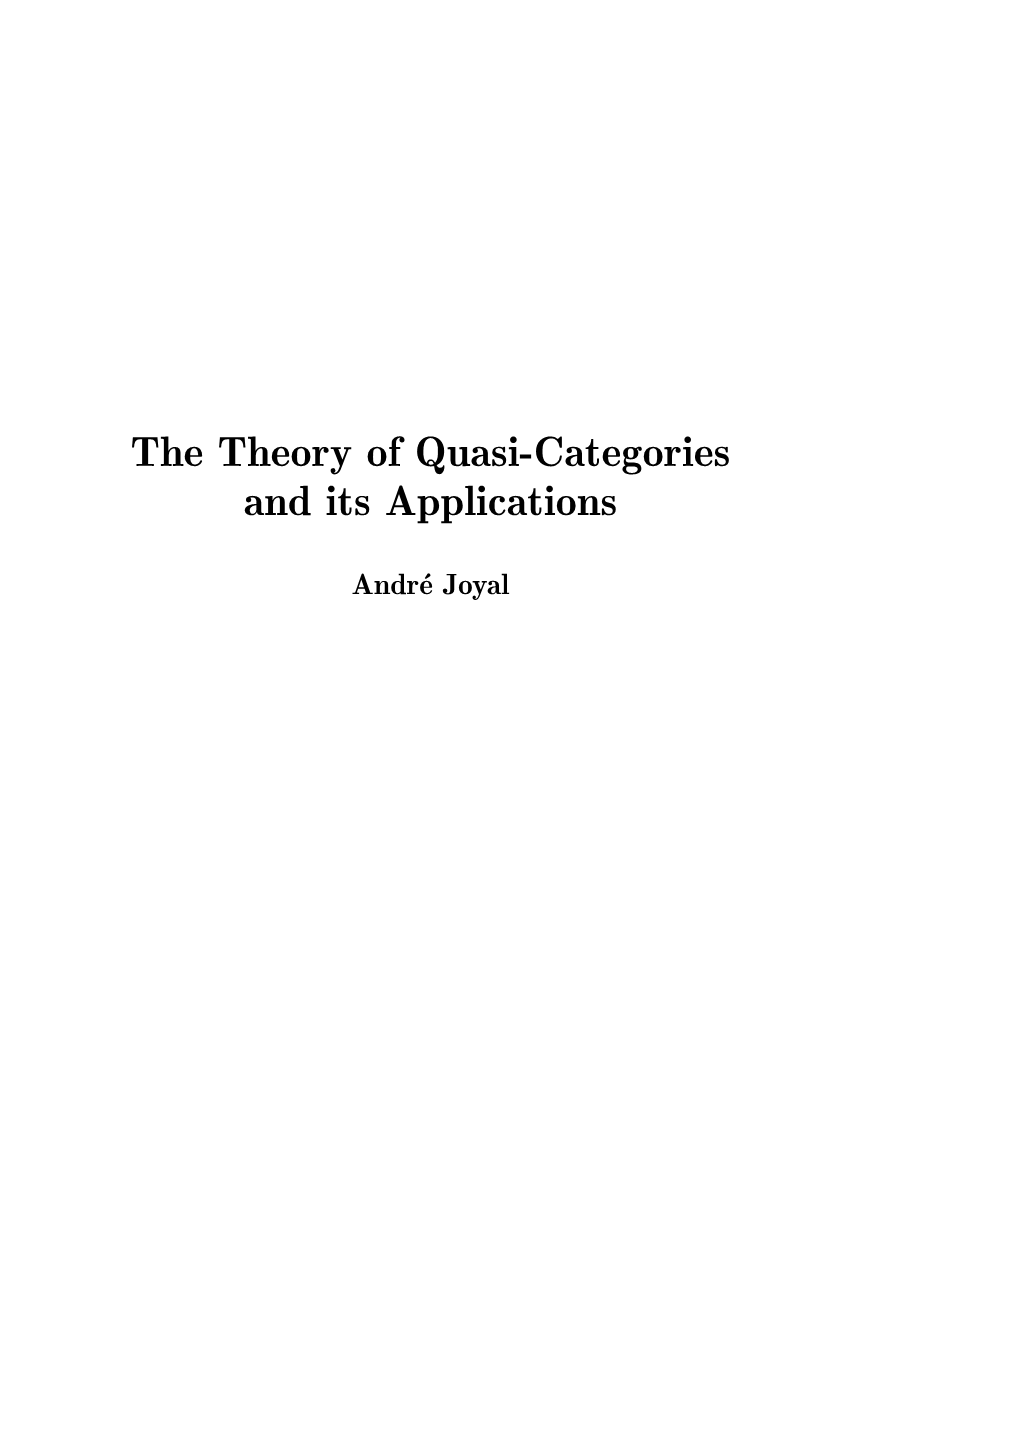 The Theory of Quasi-Categories and Its Applications